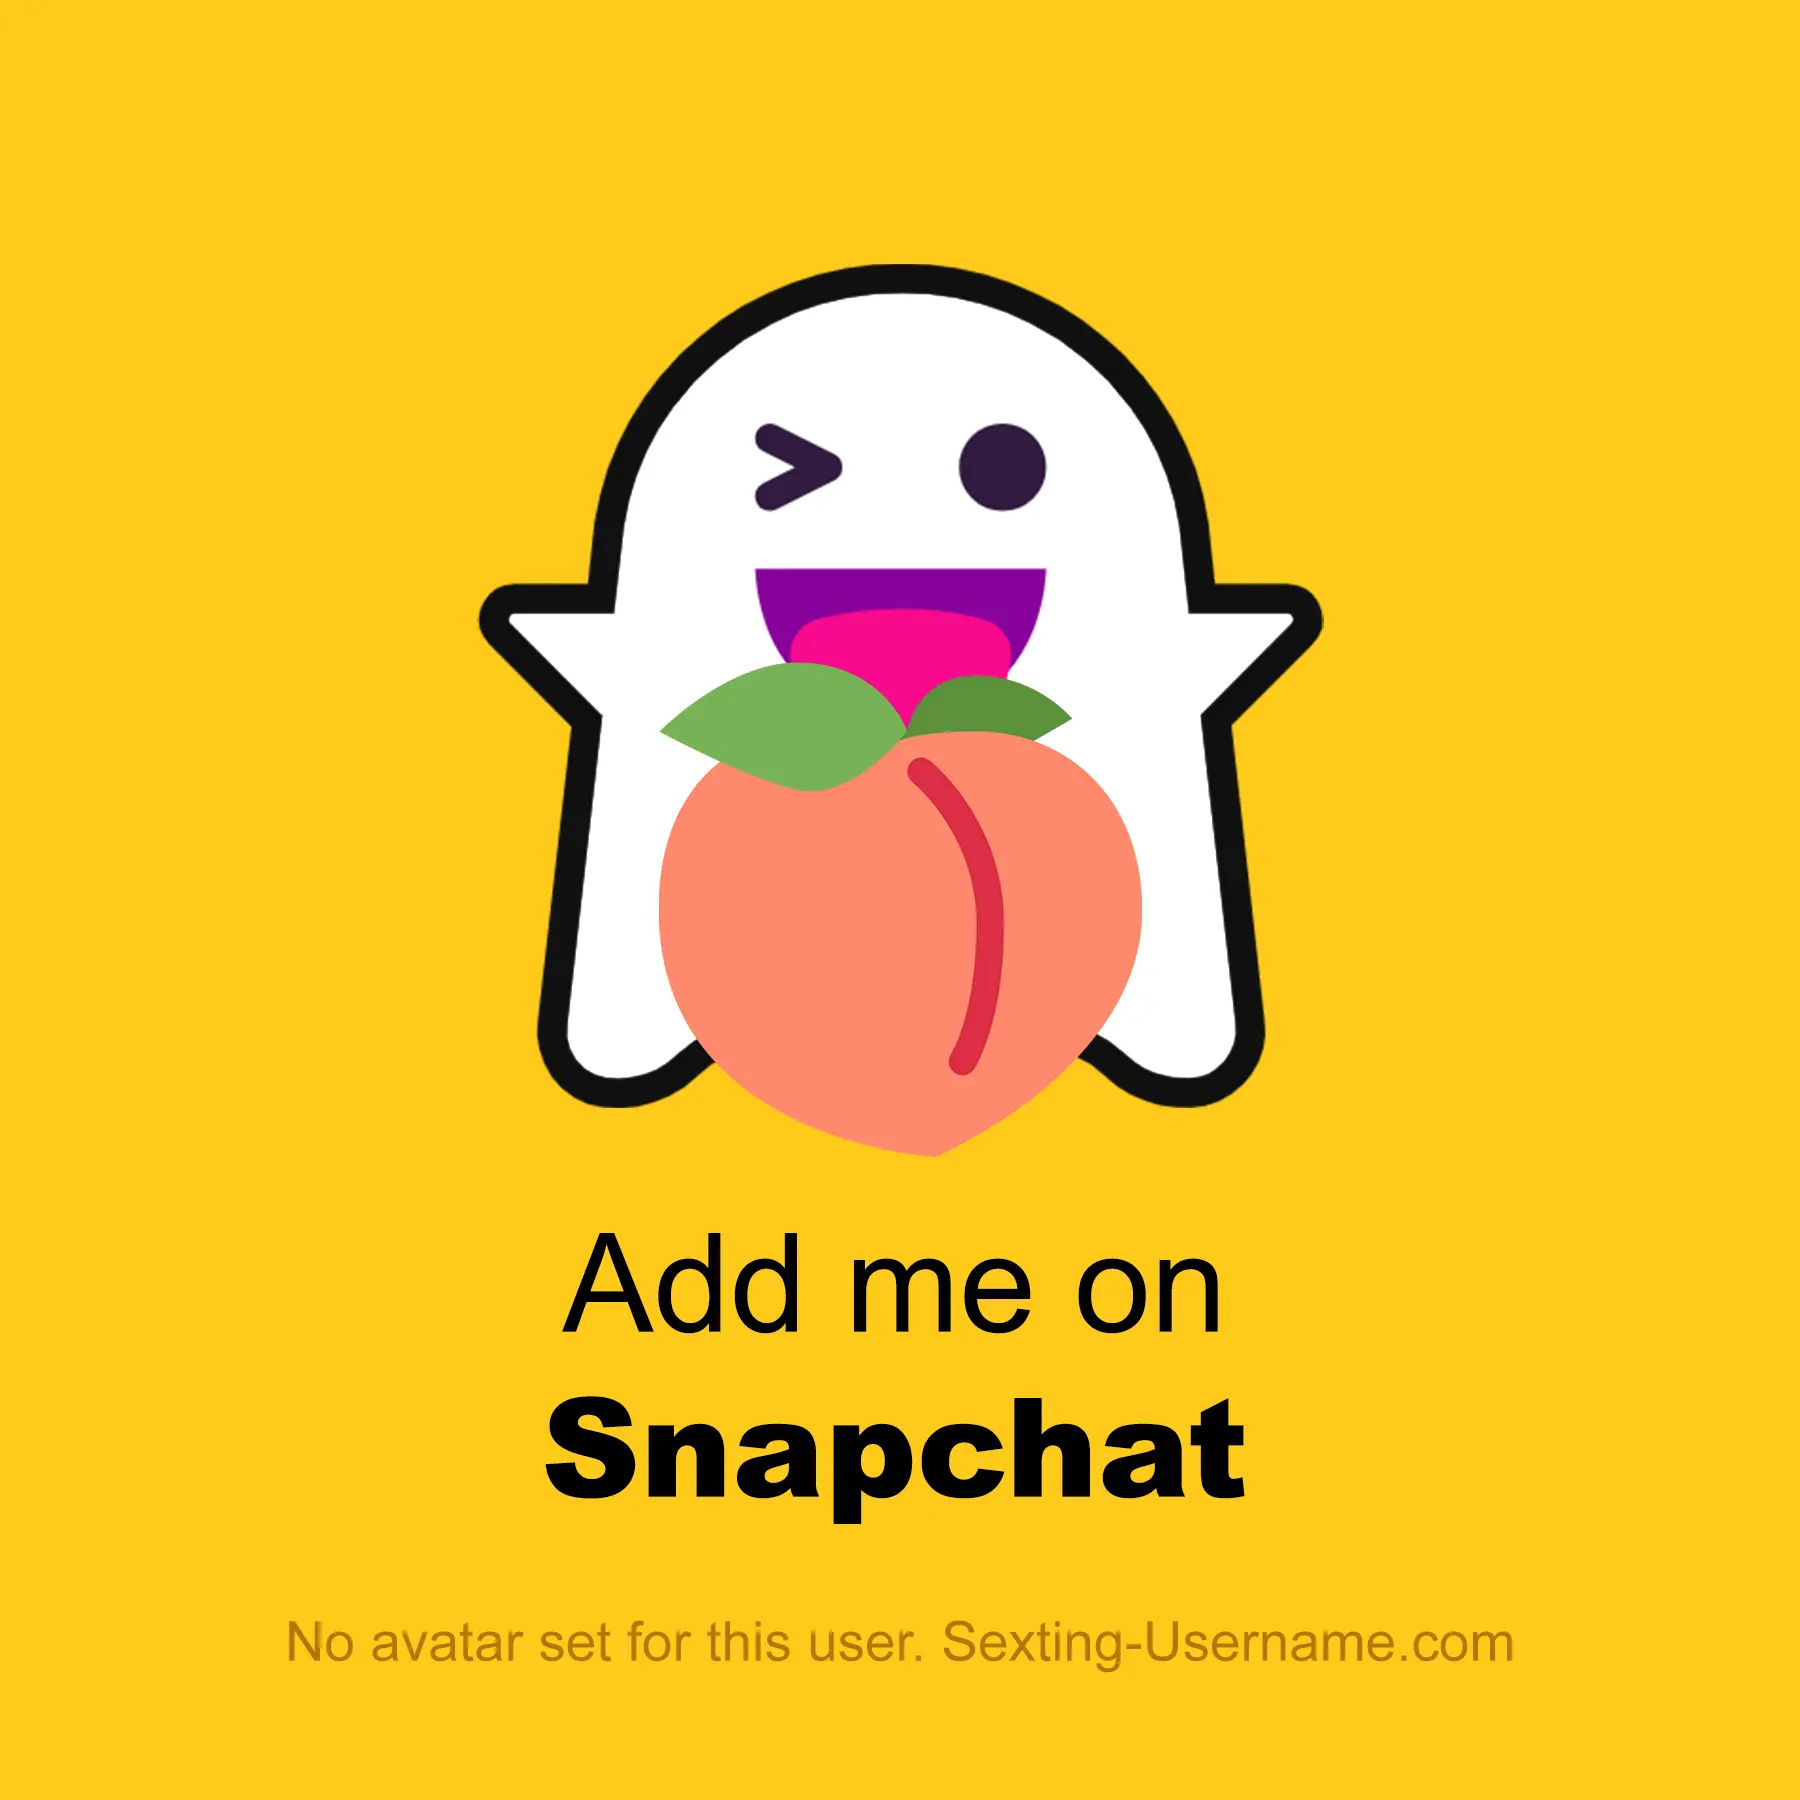 snap.Stacy97x, 19 years old, from United States